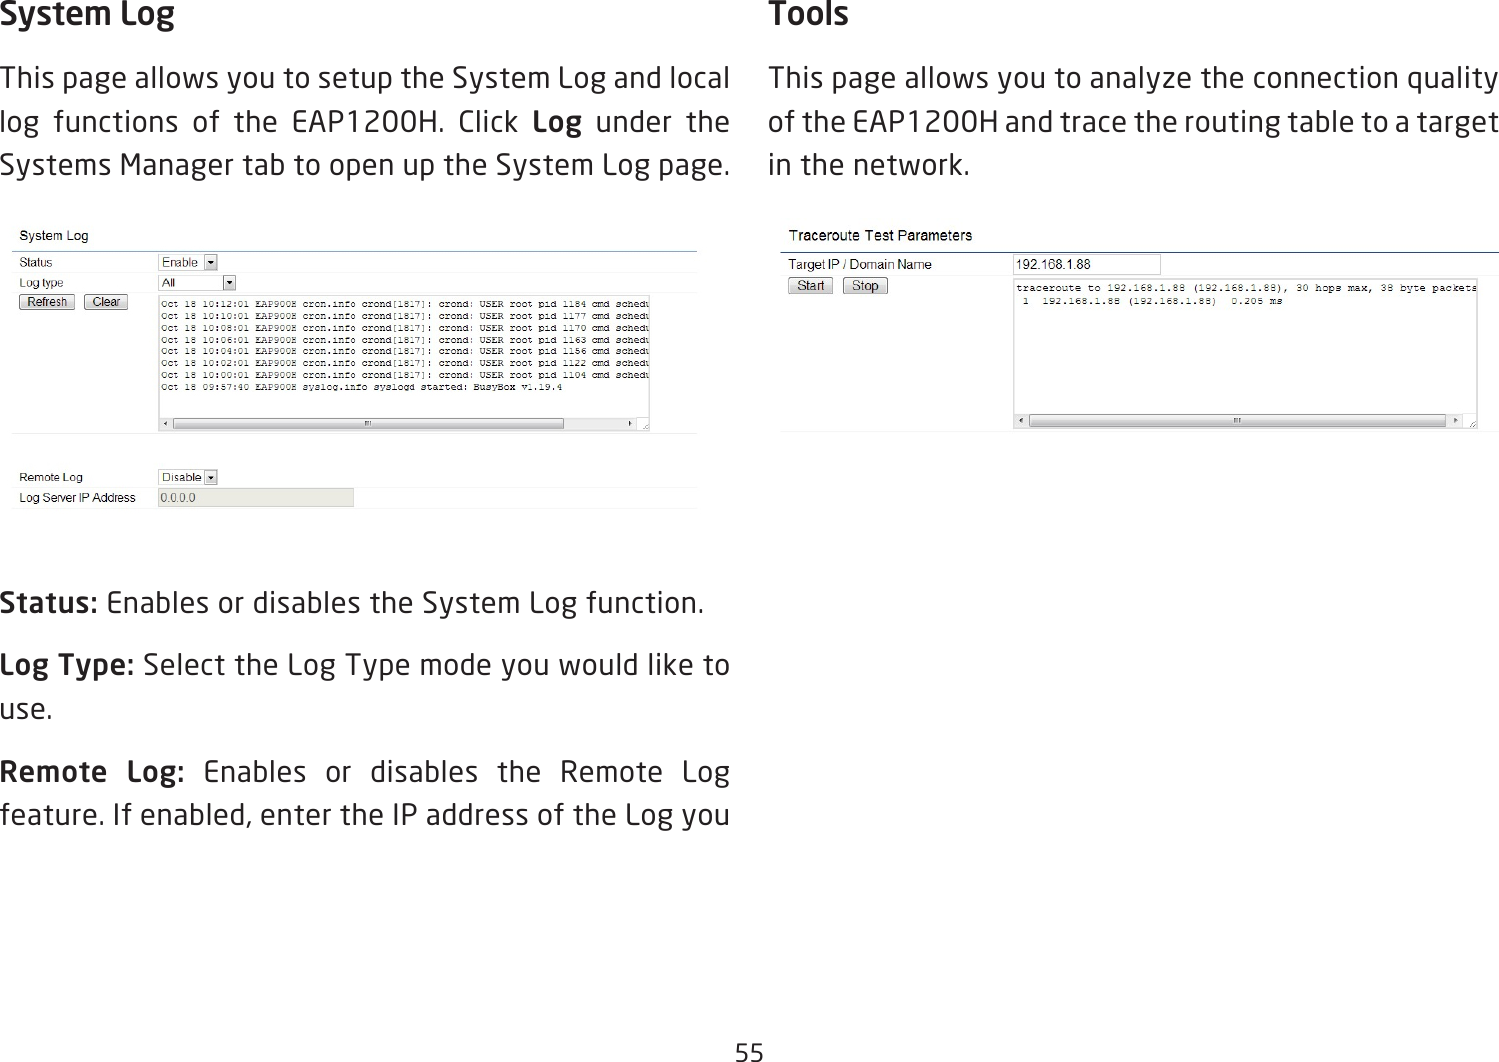 55System LogThis page allows you to setup the System Log and local log functions of the EAP1200H. Click Log under the Systems Manager tab to open up the System Log page.Status: Enables or disables the System Log function.Log Type: Select the Log Type mode you would like to use.Remote  Log:  Enables or disables the Remote Log feature.Ifenabled,entertheIPaddressoftheLogyouToolsThis page allows you to analyze the connection quality of the EAP1200H and trace the routing table to a target in the network.